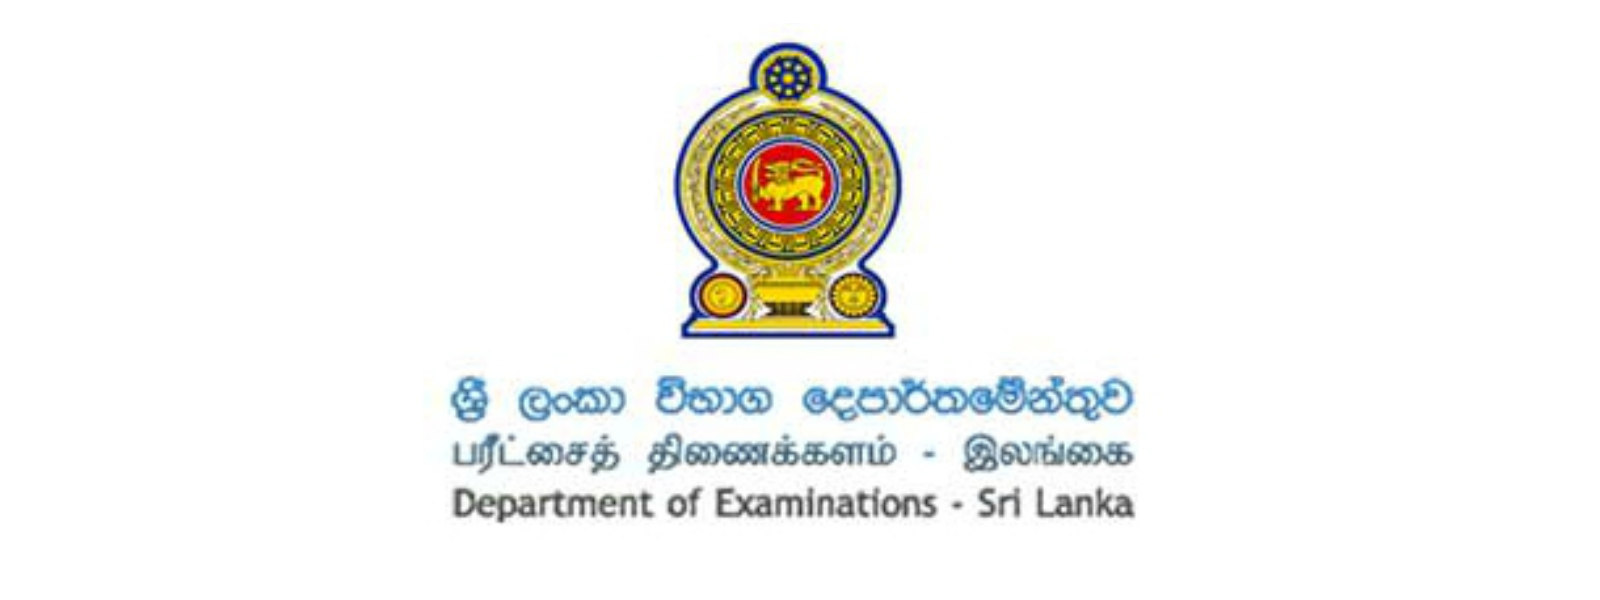 O/L certificates to be issued from tomorrow